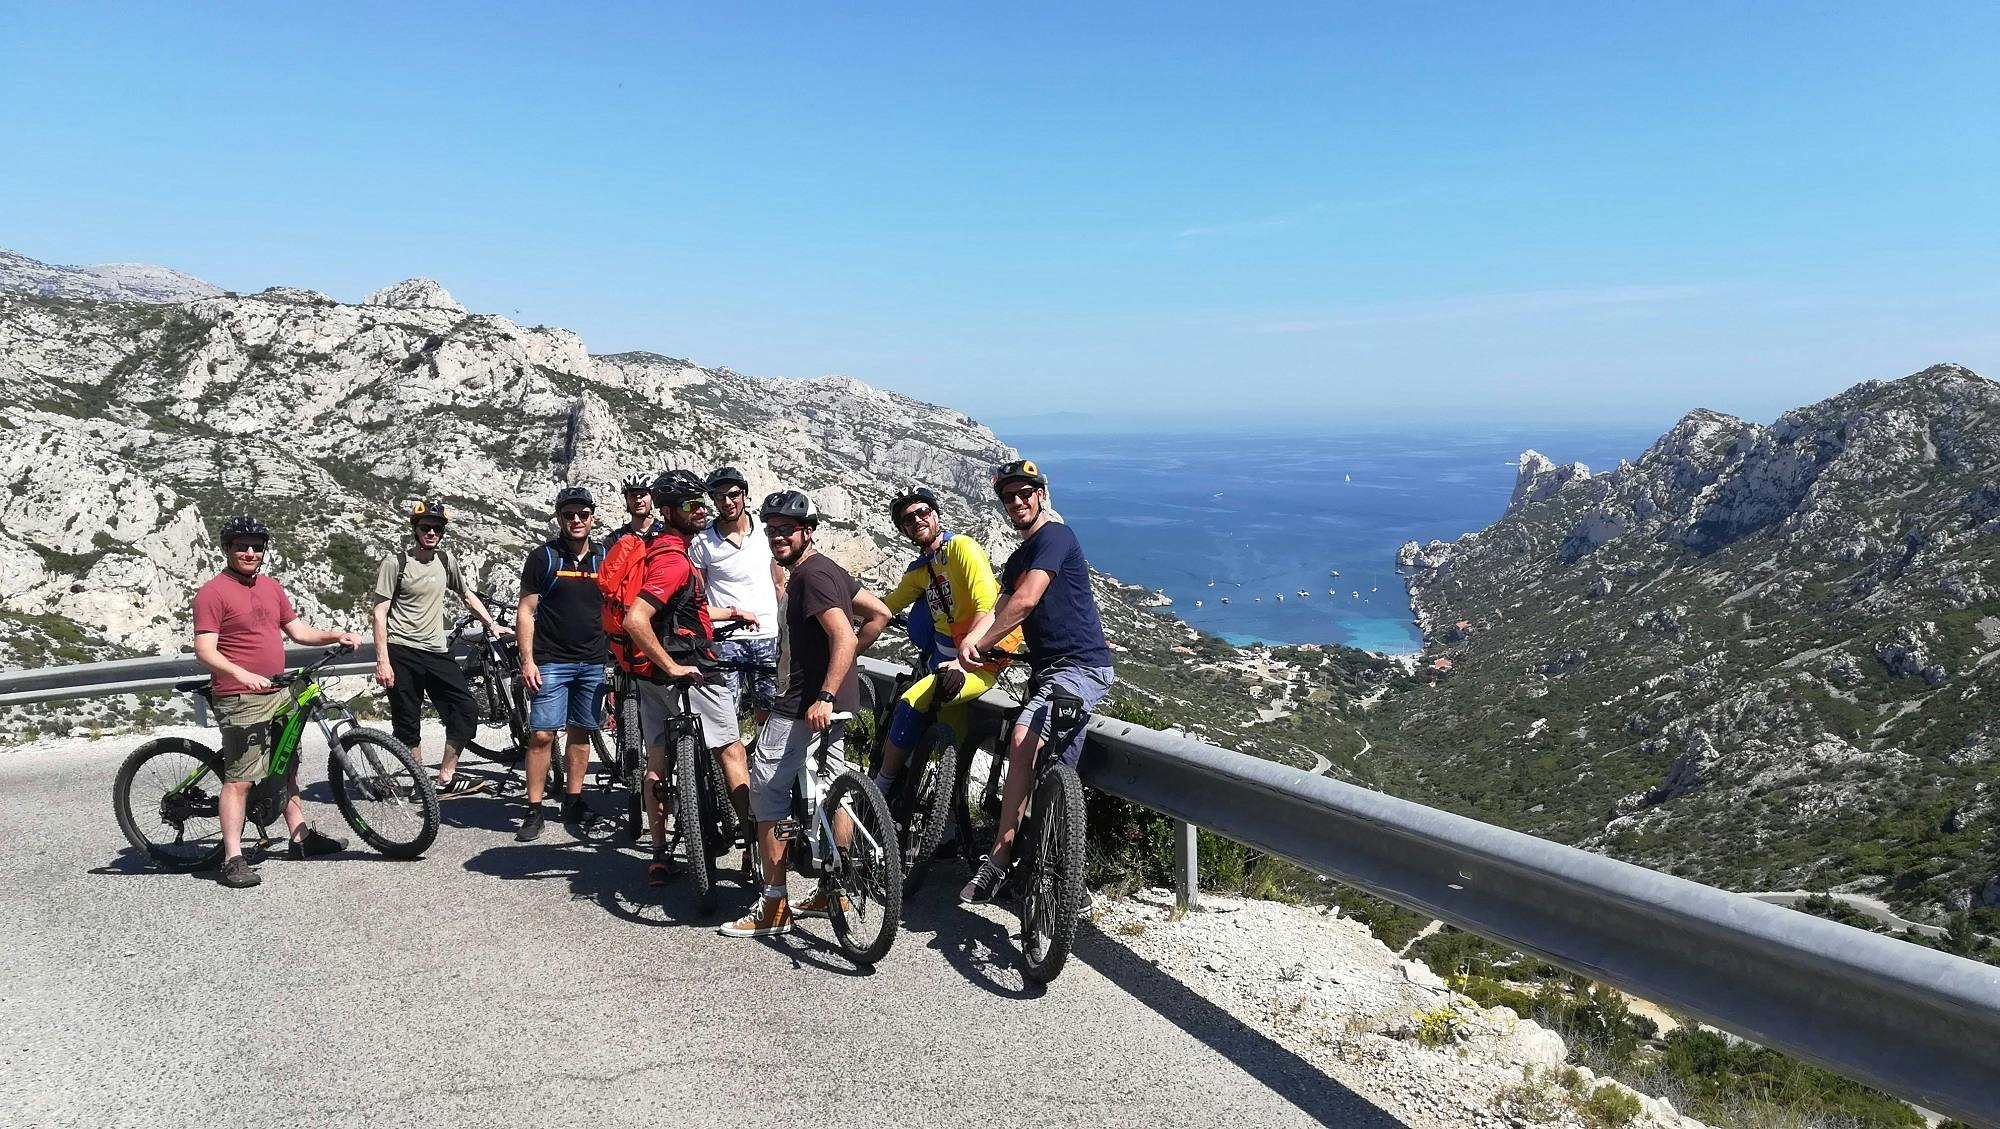 Road bike rental for Calanques National Park and Marseille